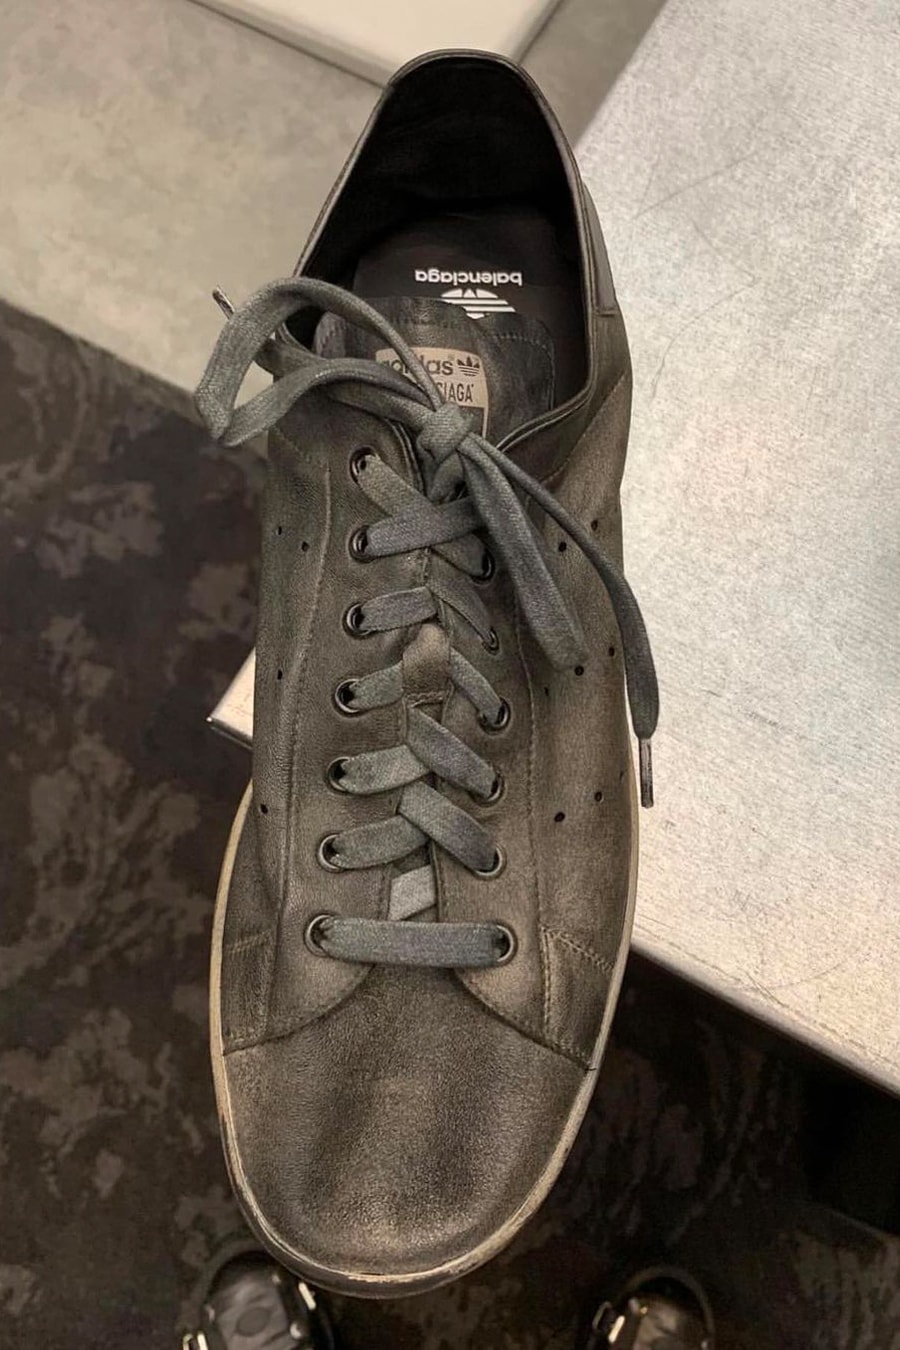 Balenciaga Drops Extremely Worn Sneakers for $625